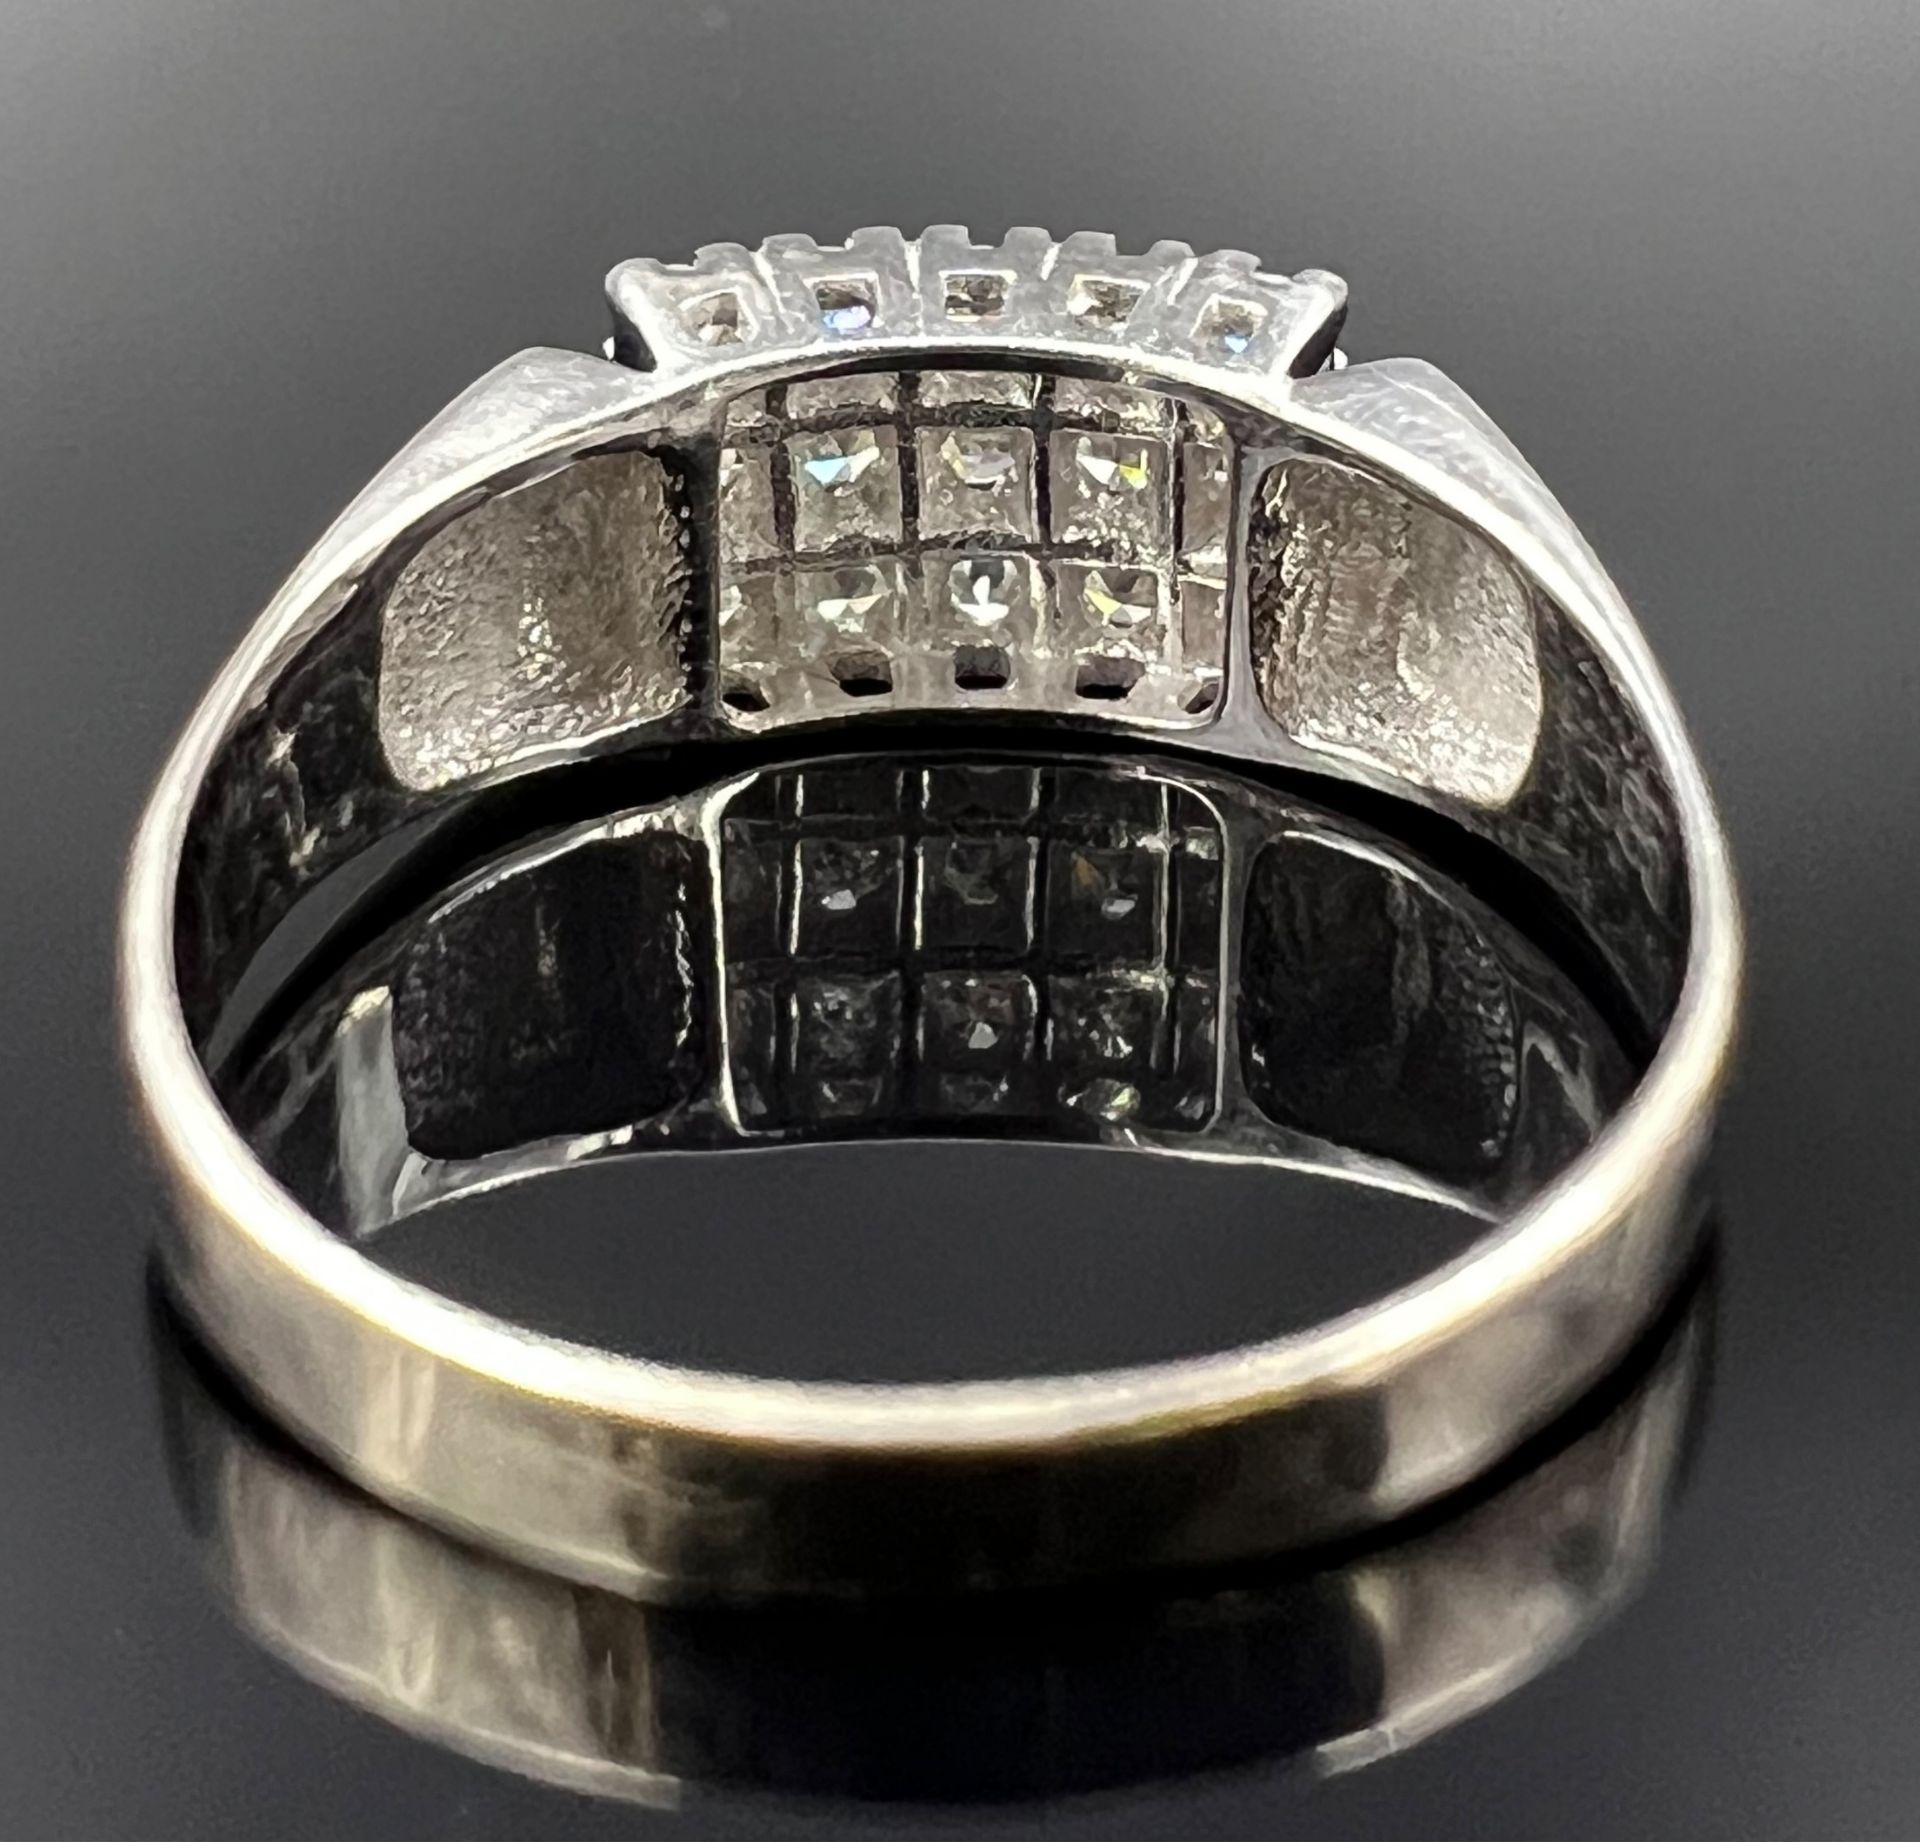 Ladies' ring. 585 white gold with diamonds. - Image 3 of 7